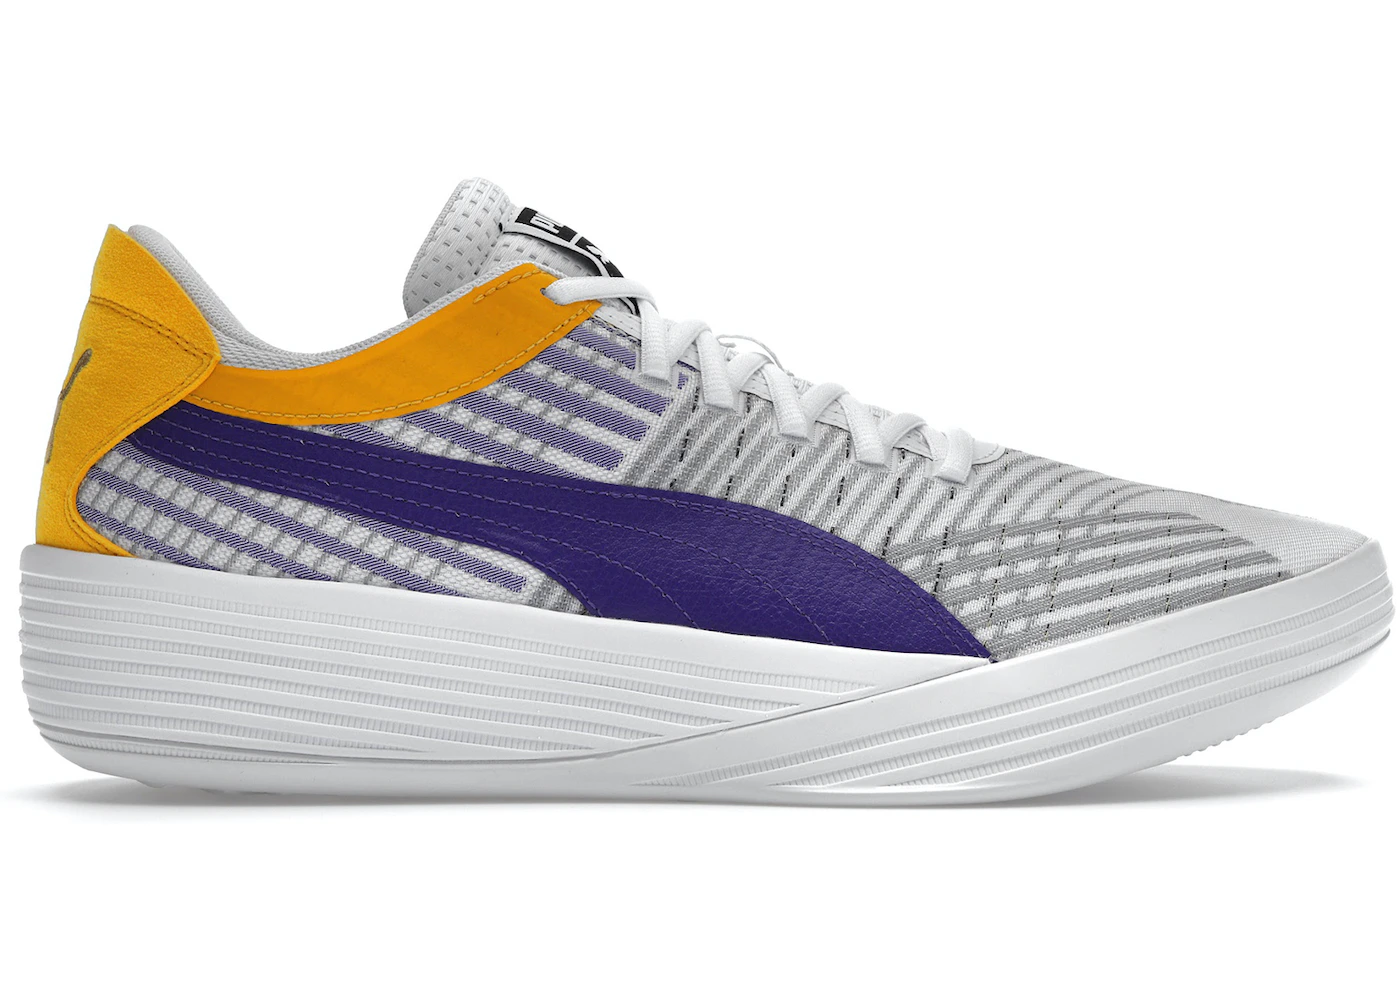 Puma Clyde All-Pro Low Lakers Men's - 195124-02 - US